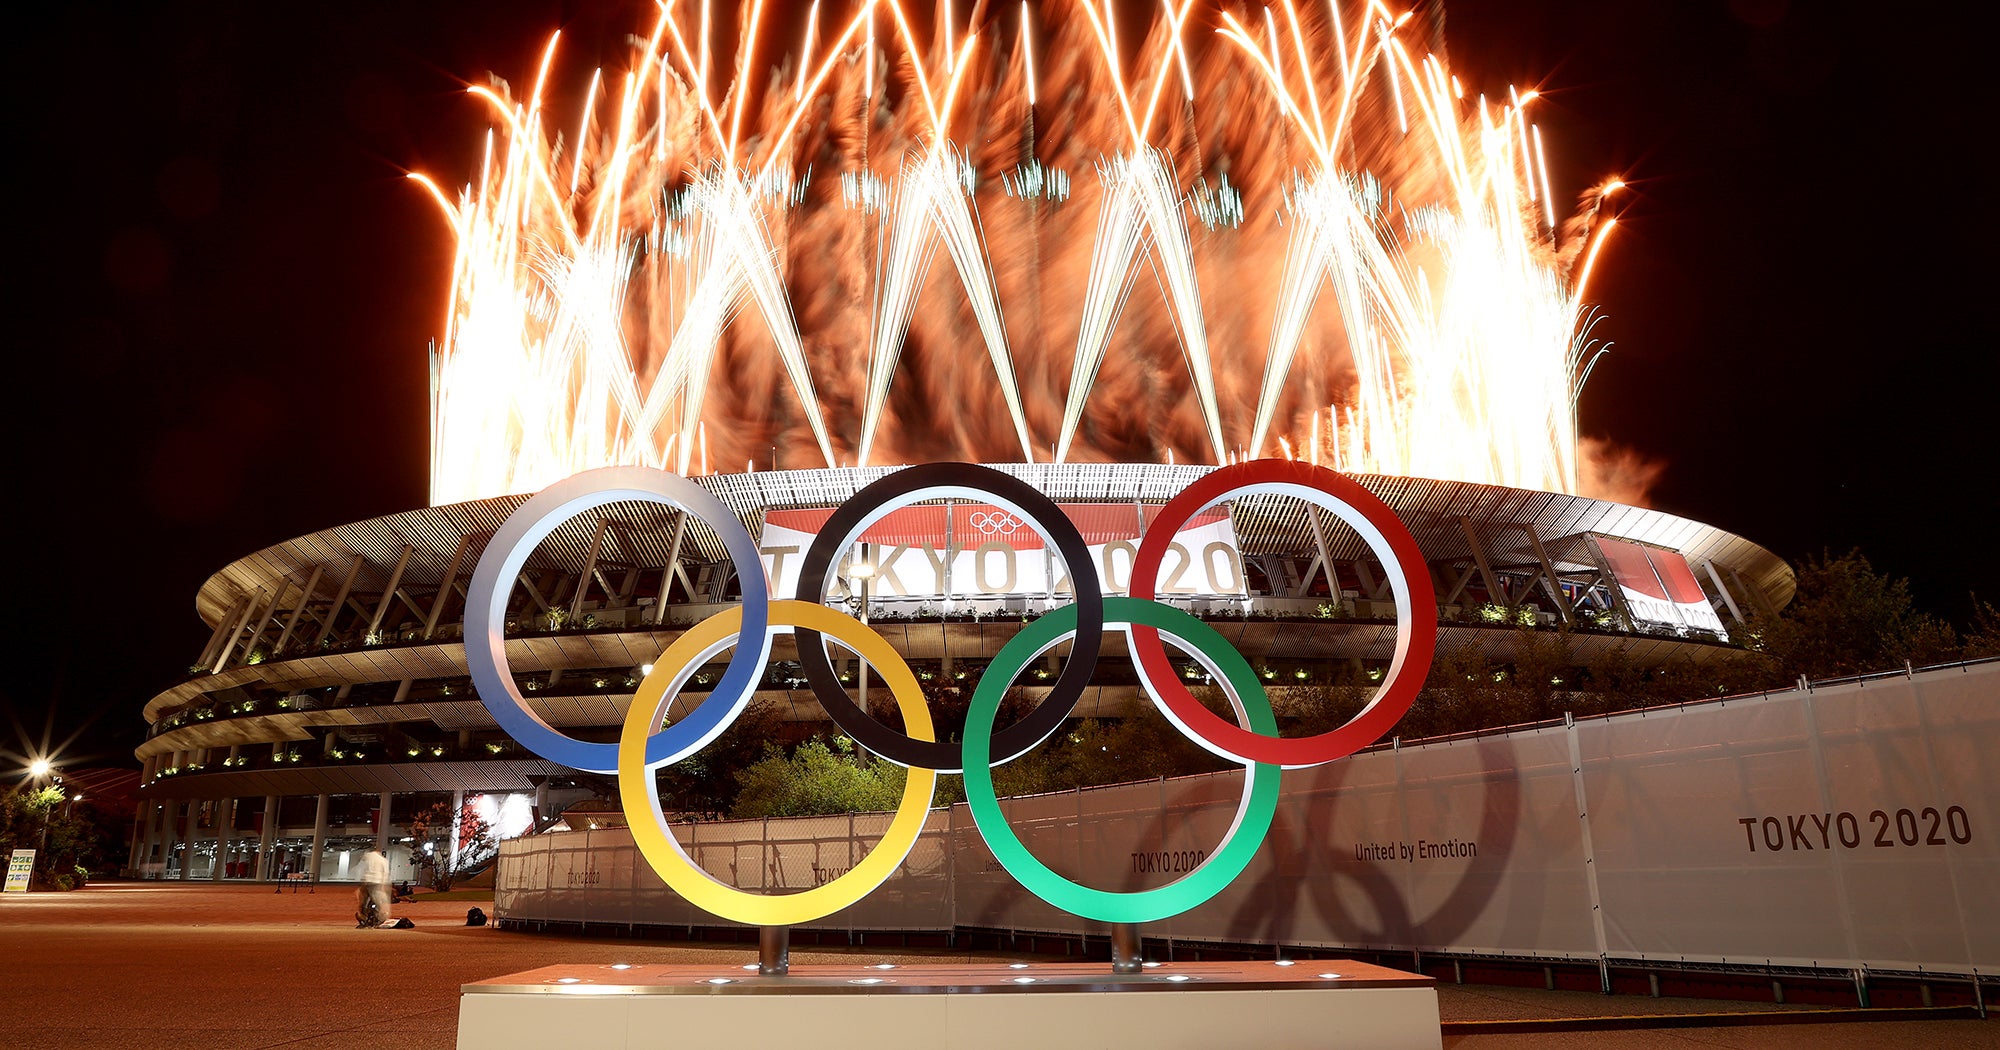 4 Streaming Services Where You Can Watch The Olympics